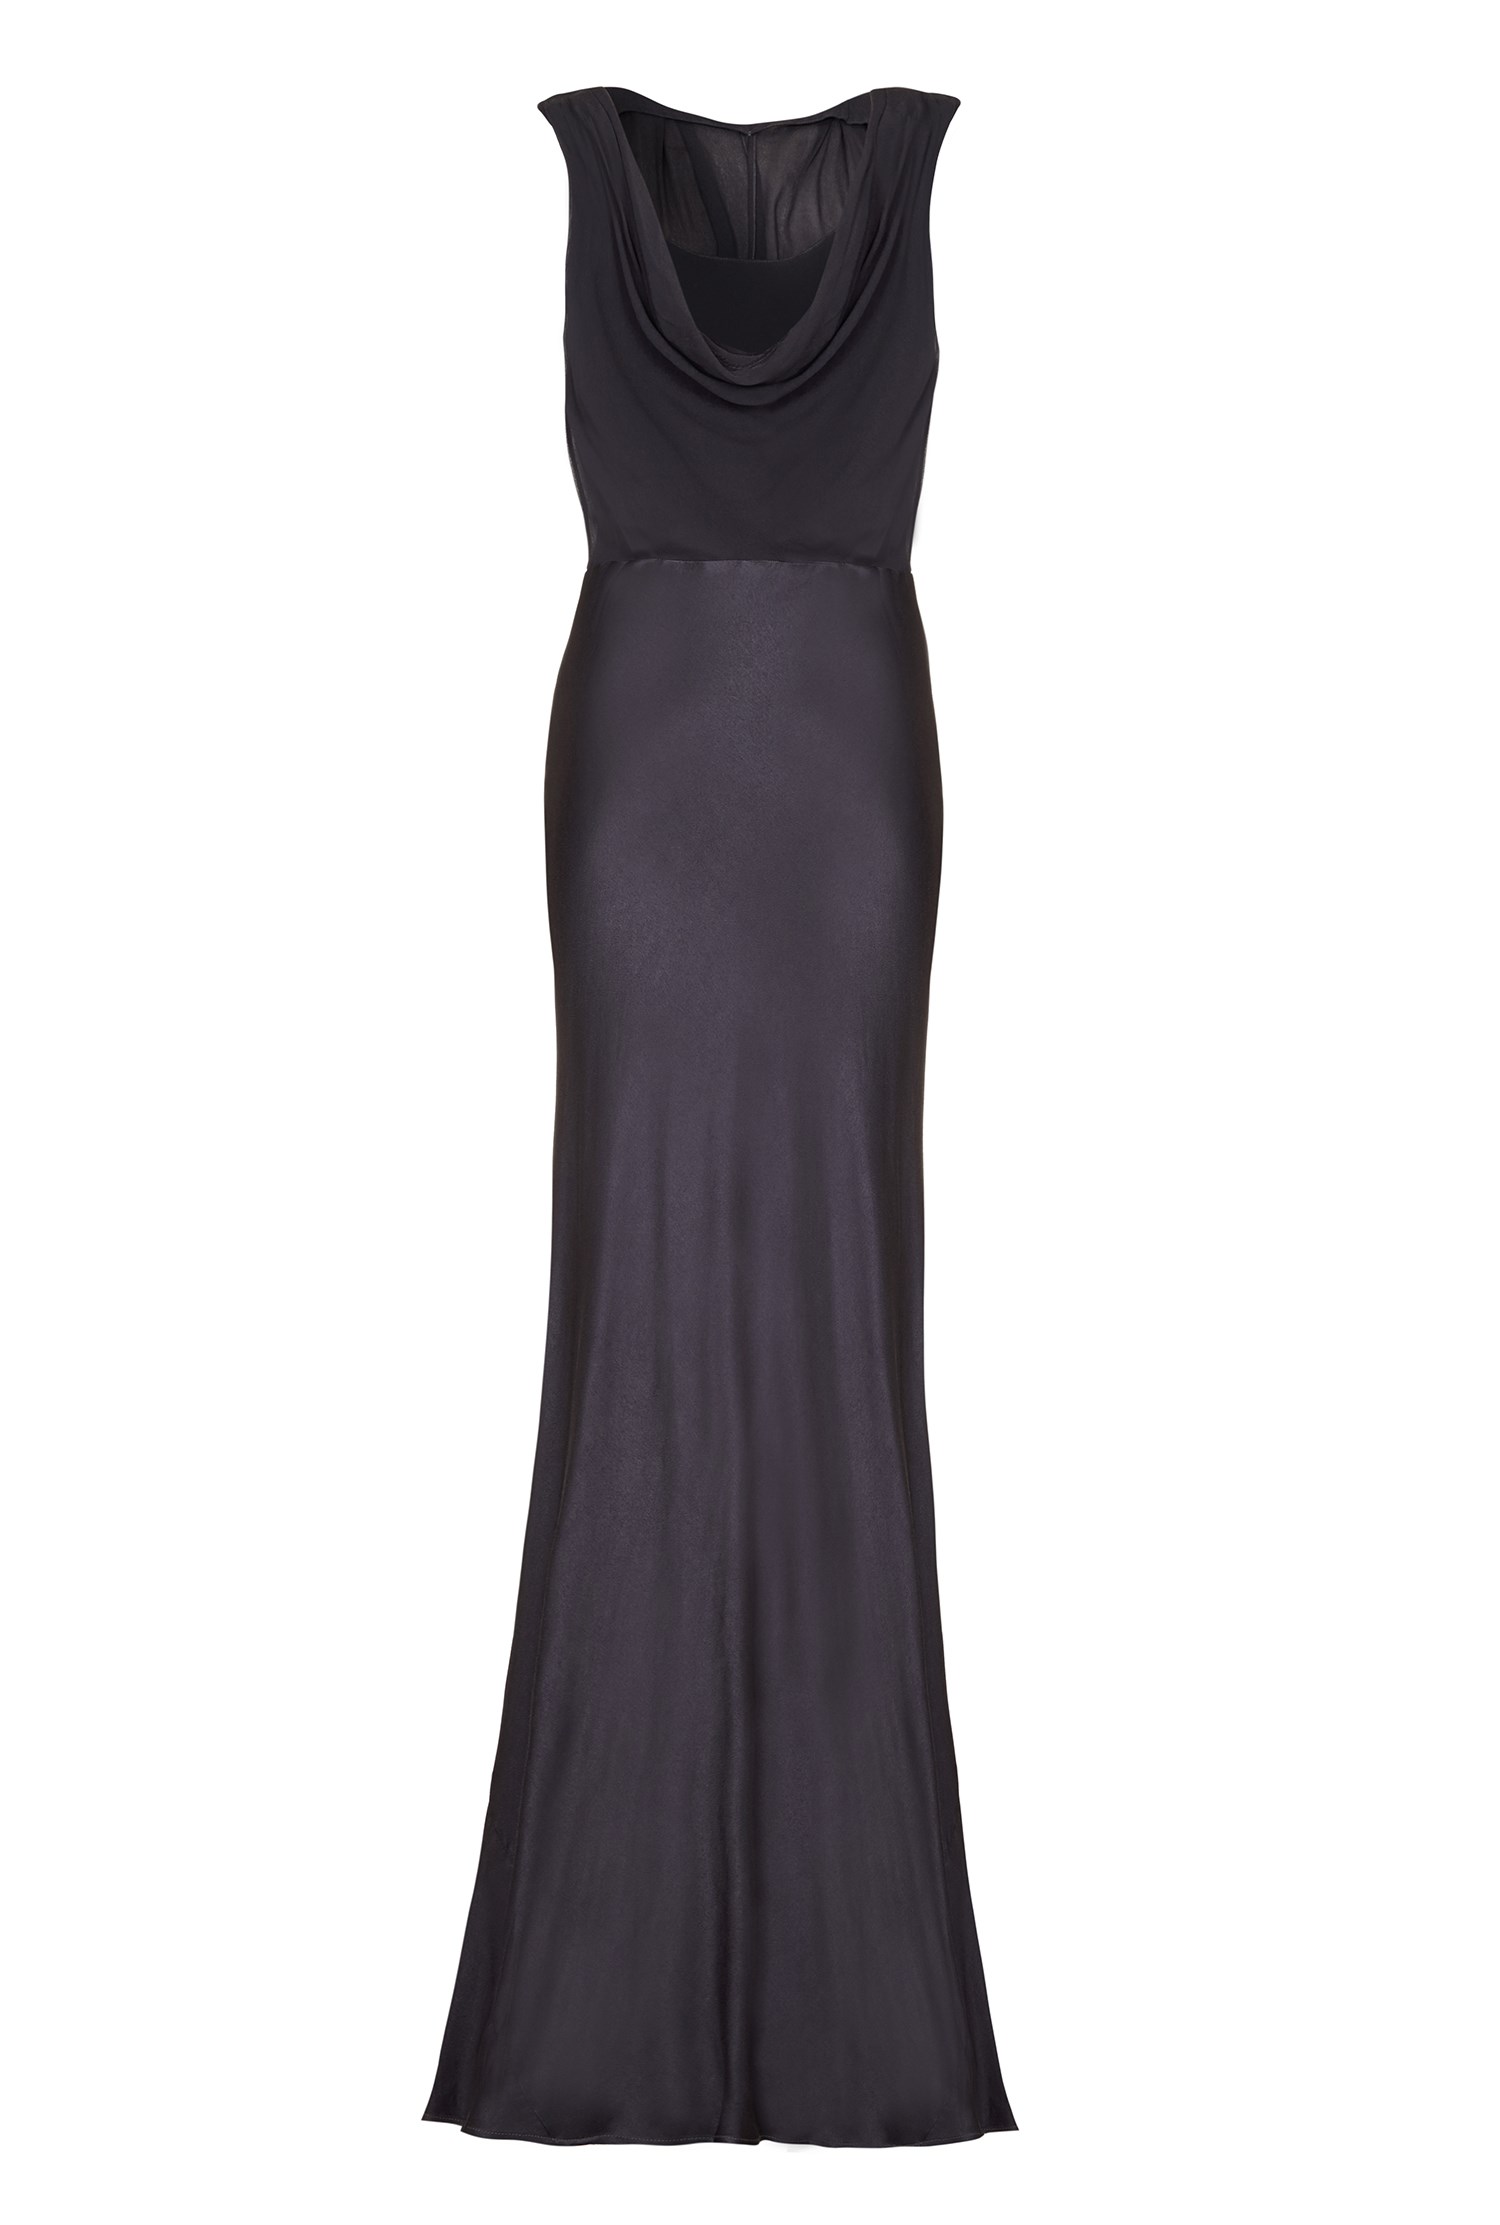 Claudia Long Charcoal Evening Gown Dress | Ghost London